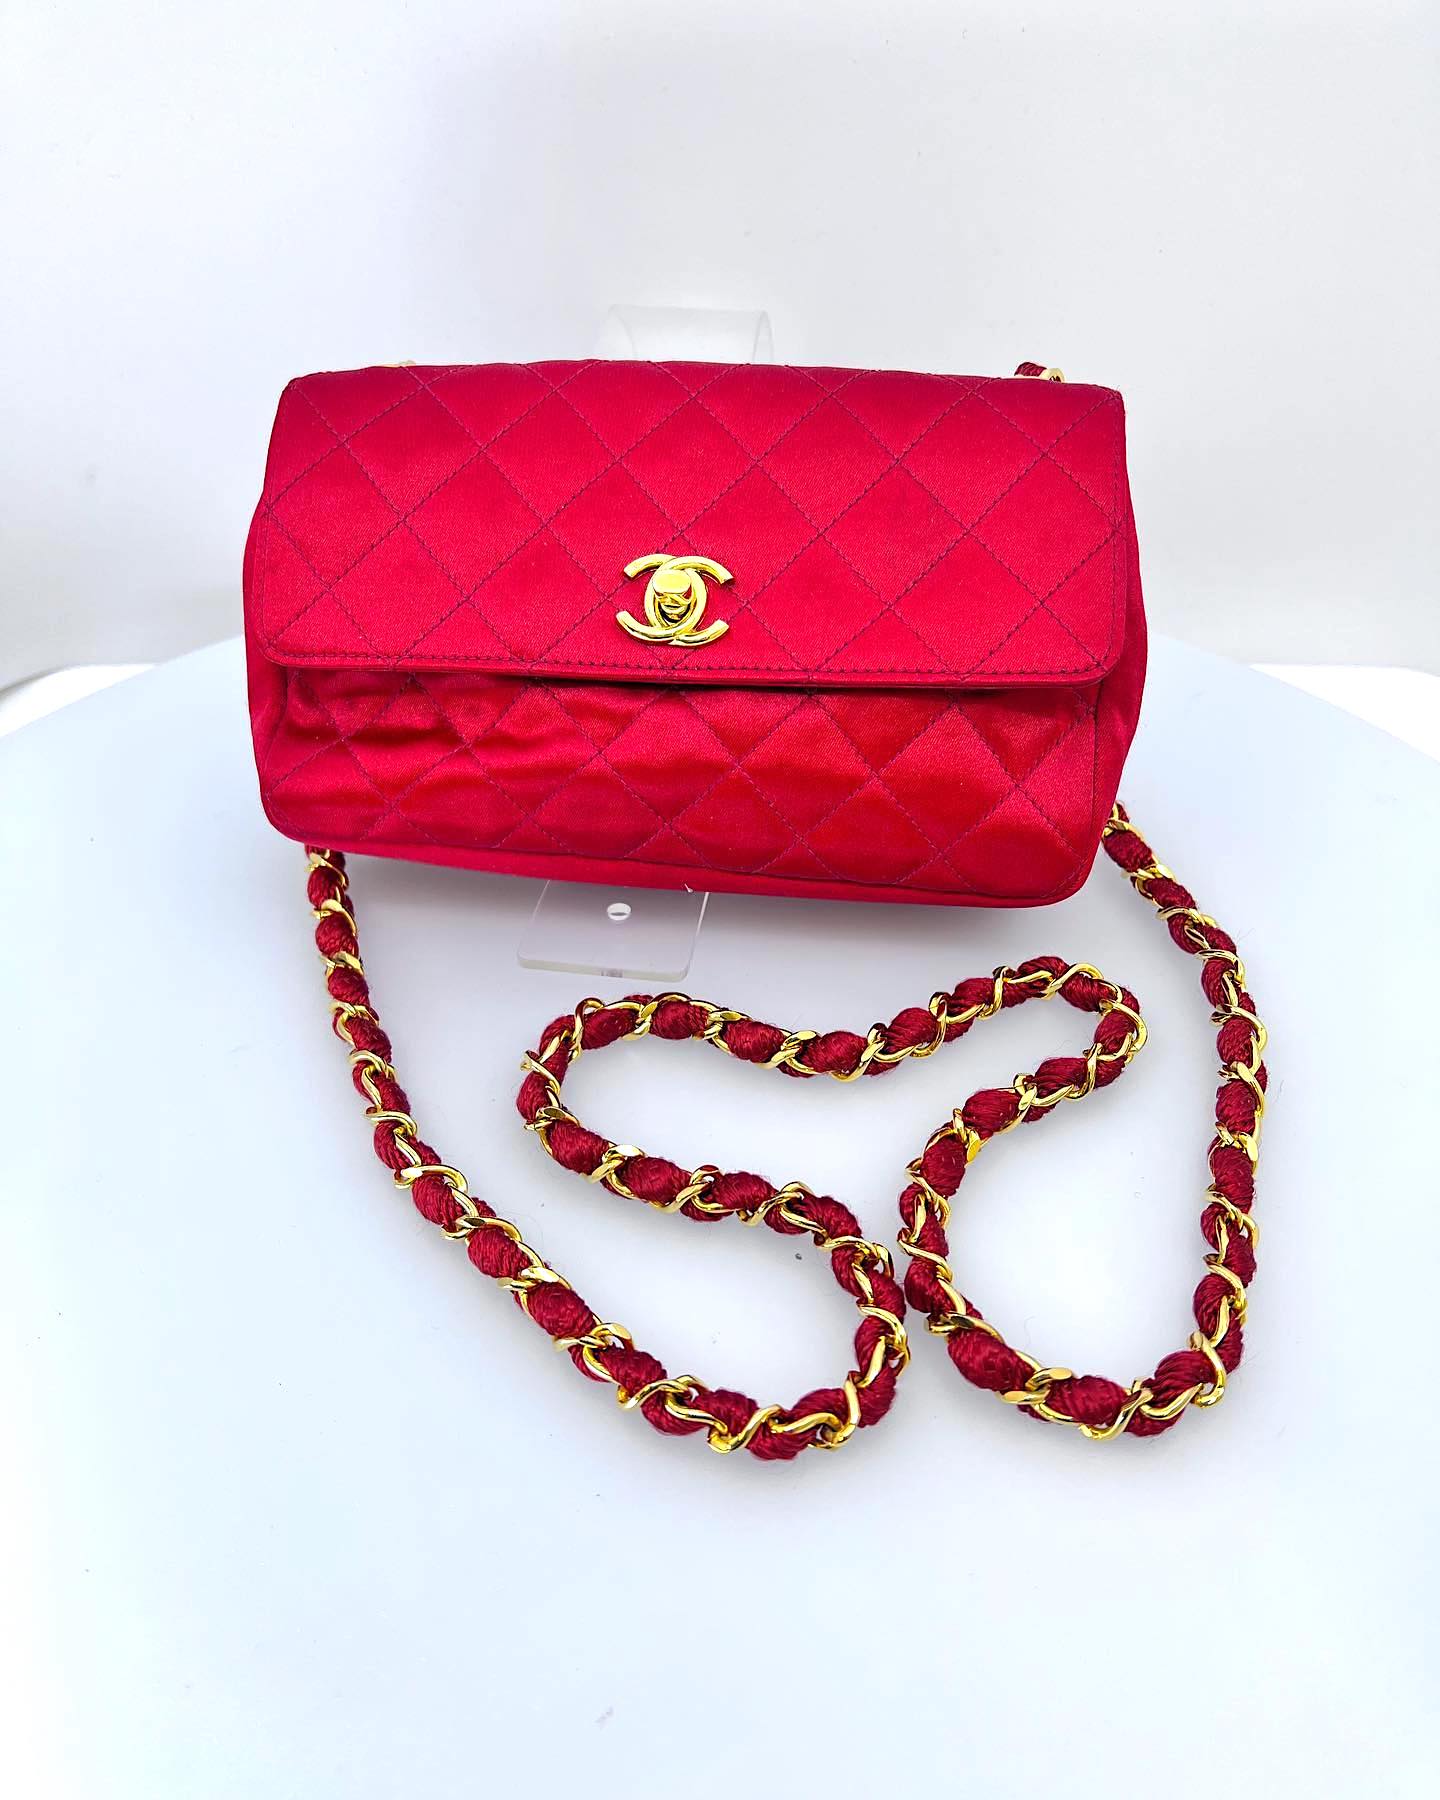 CHANEL CC QUILTED VINTAGE SATIN MINI FLAP BAG